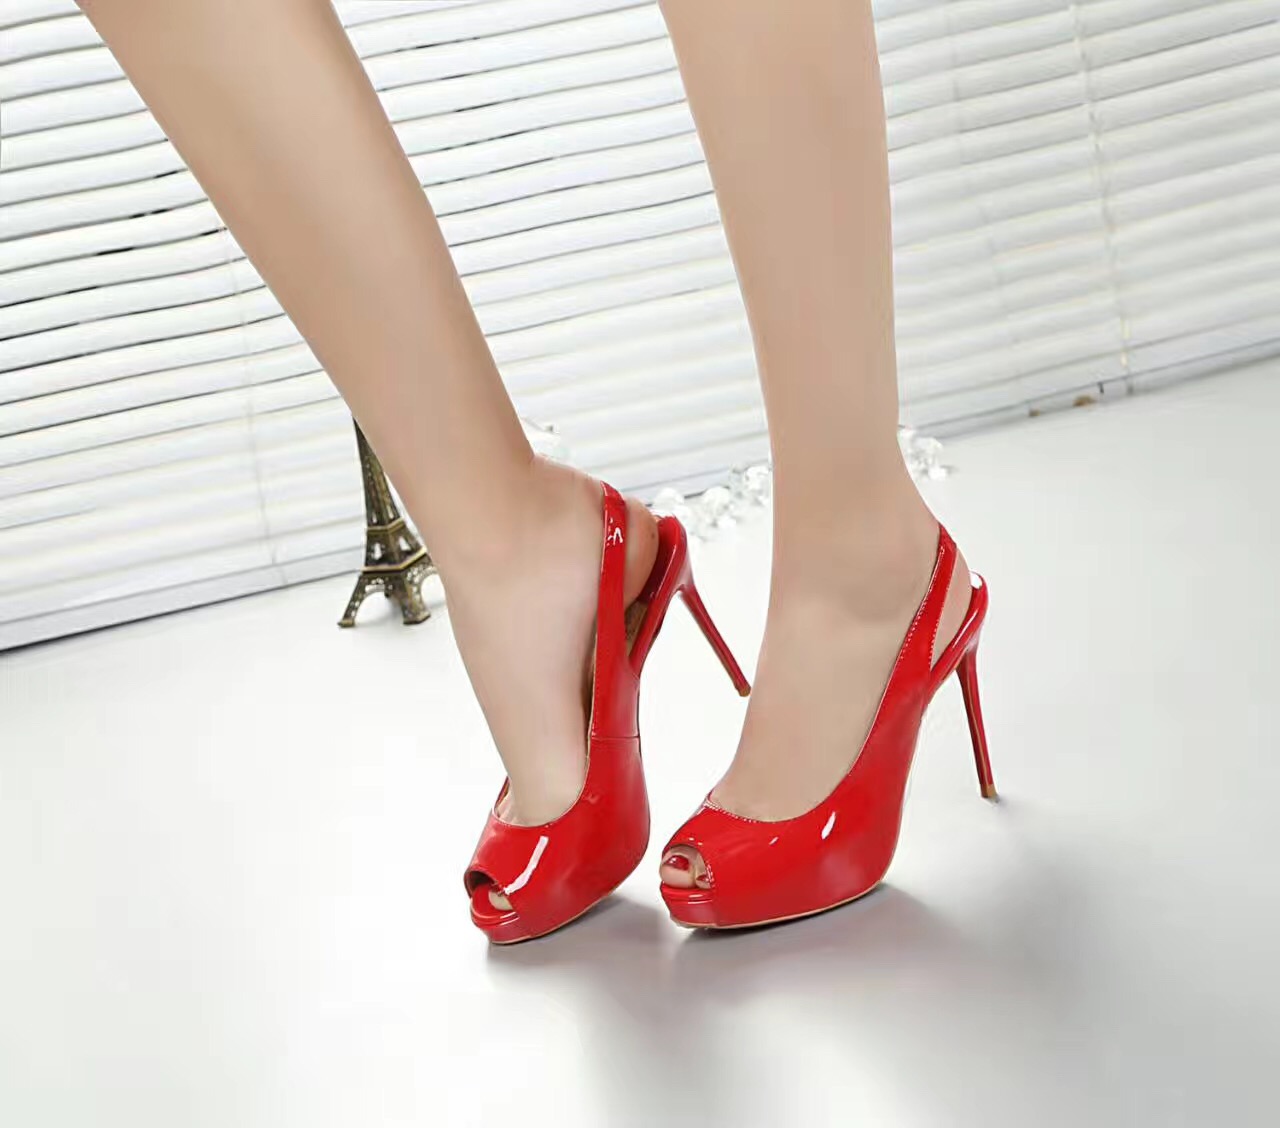 Christian Louboutin CL heels red 10cm sandals shoes